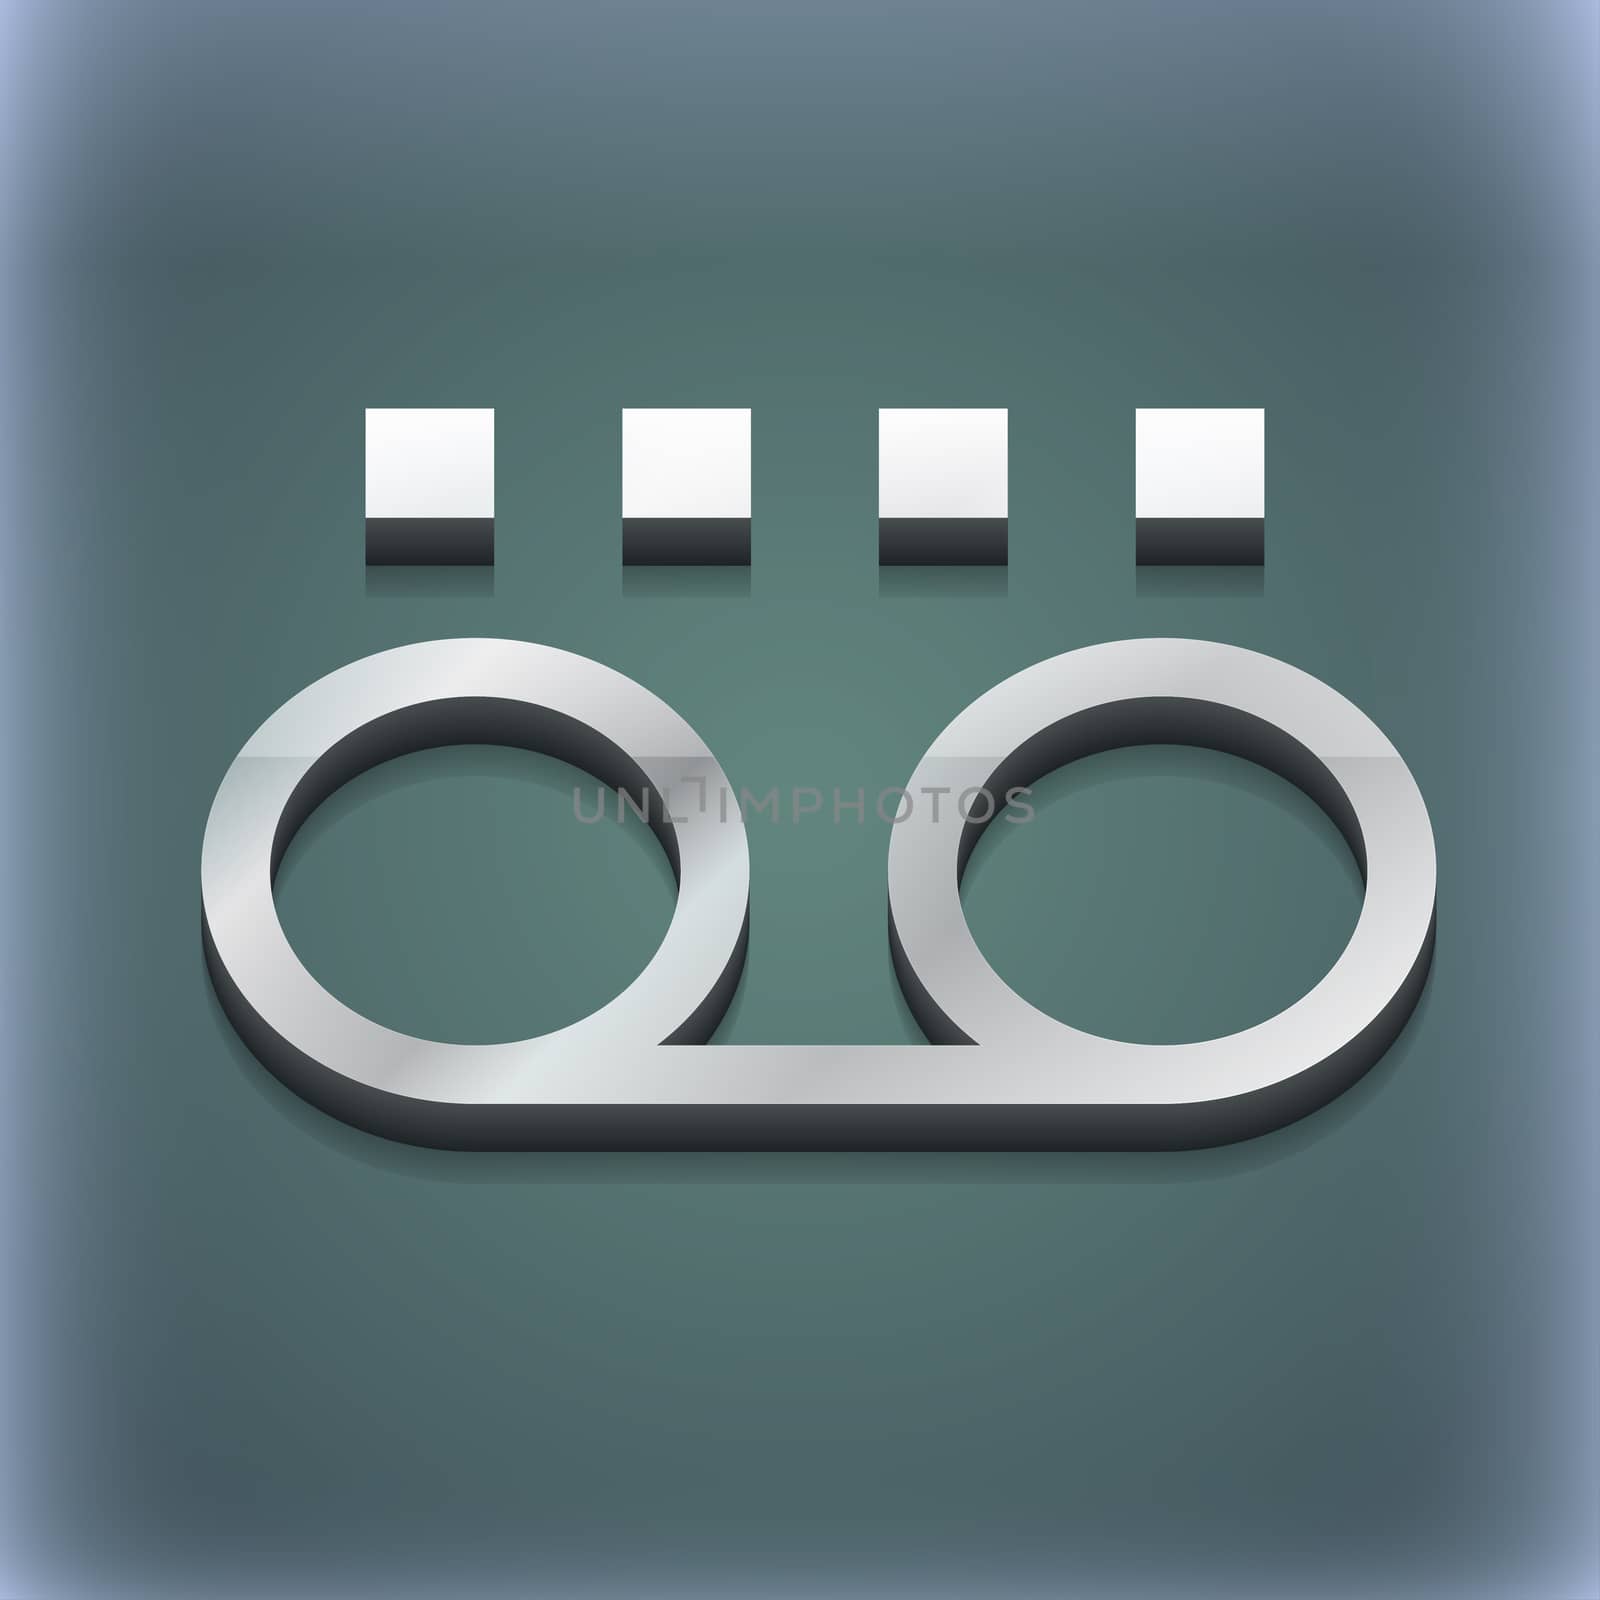 audio cassette icon symbol. 3D style. Trendy, modern design with space for your text illustration. Raster version